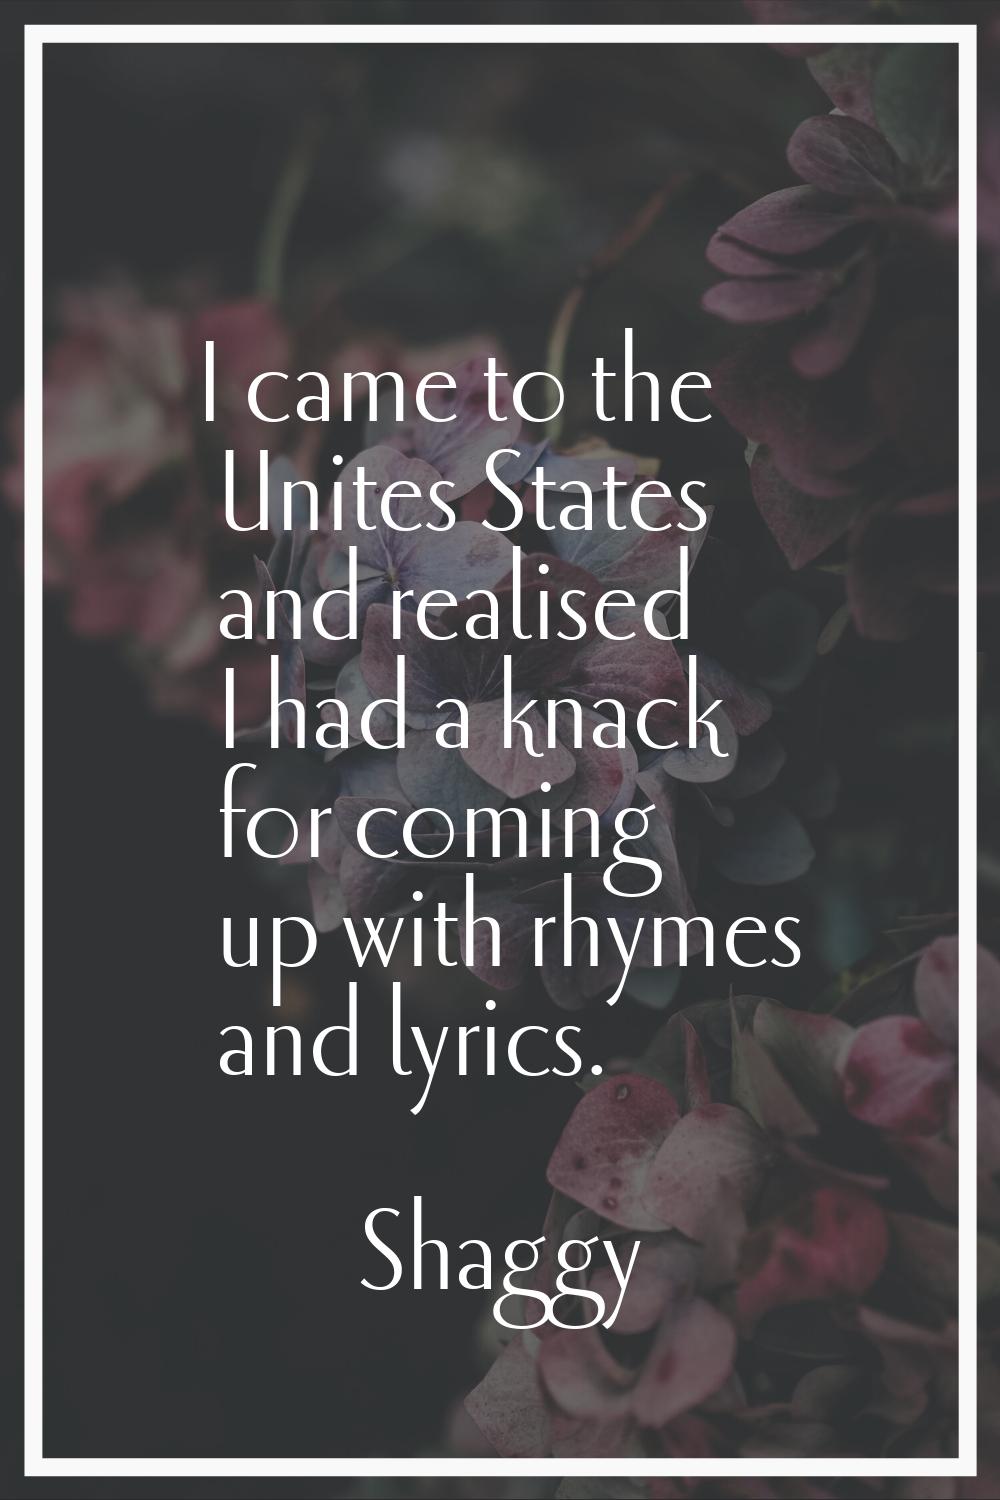 I came to the Unites States and realised I had a knack for coming up with rhymes and lyrics.